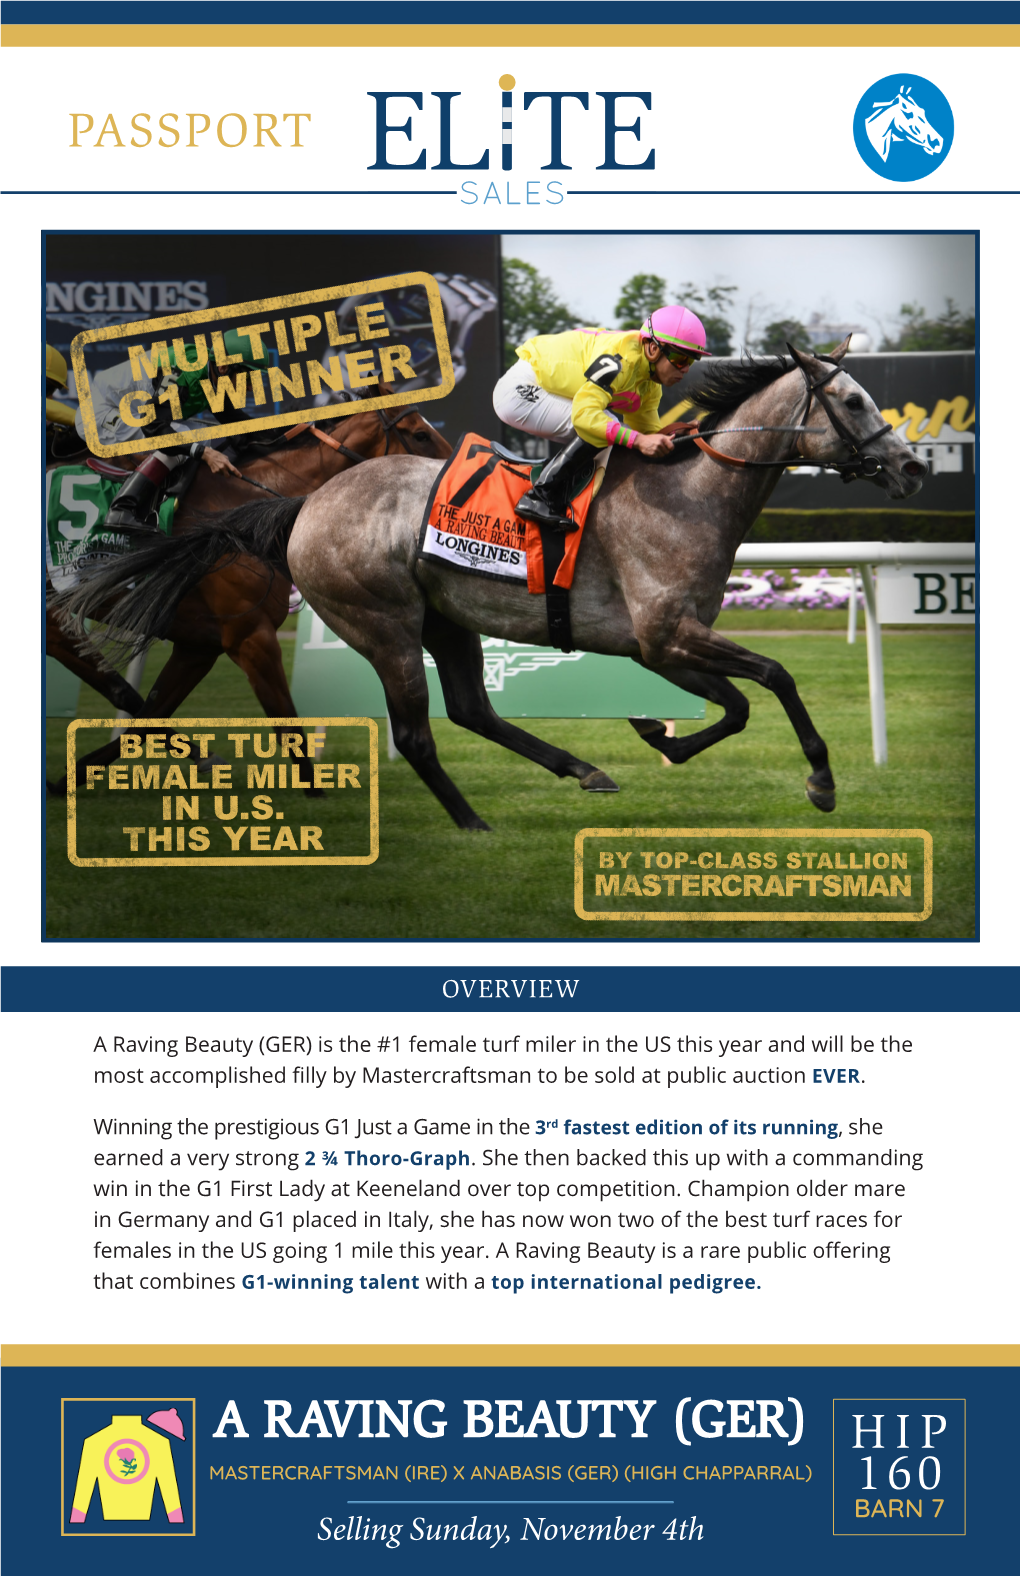 A Raving Beauty (GER) Is the #1 Female Turf Miler in the US This Year and Will Be the Most Accomplished Filly by Mastercraftsman to Be Sold at Public Auctionever